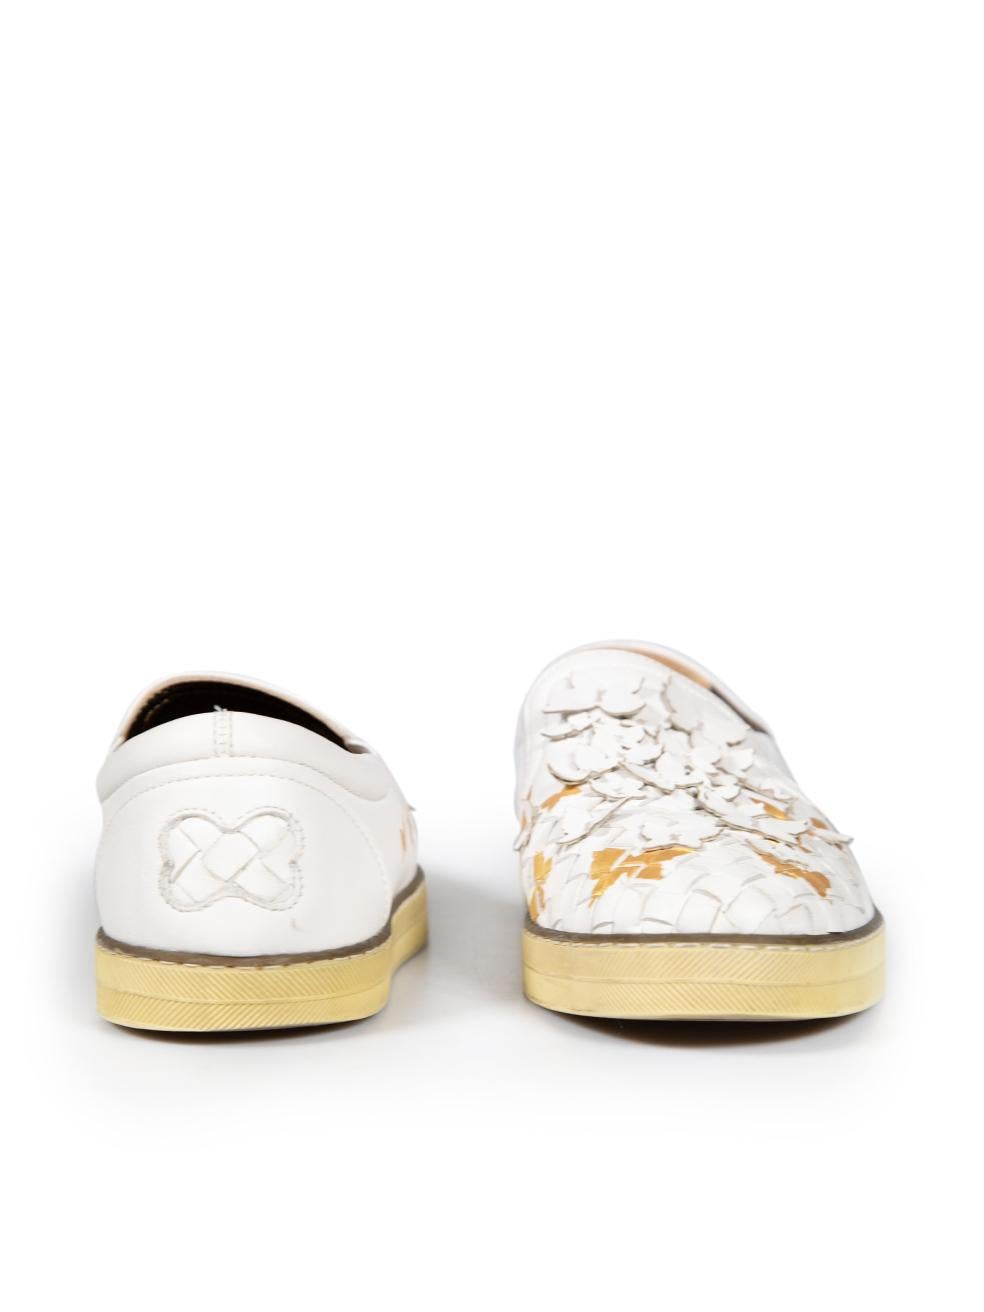 Bottega Veneta White Leather Butterfly Trainers Size IT 37.5 In Good Condition For Sale In London, GB